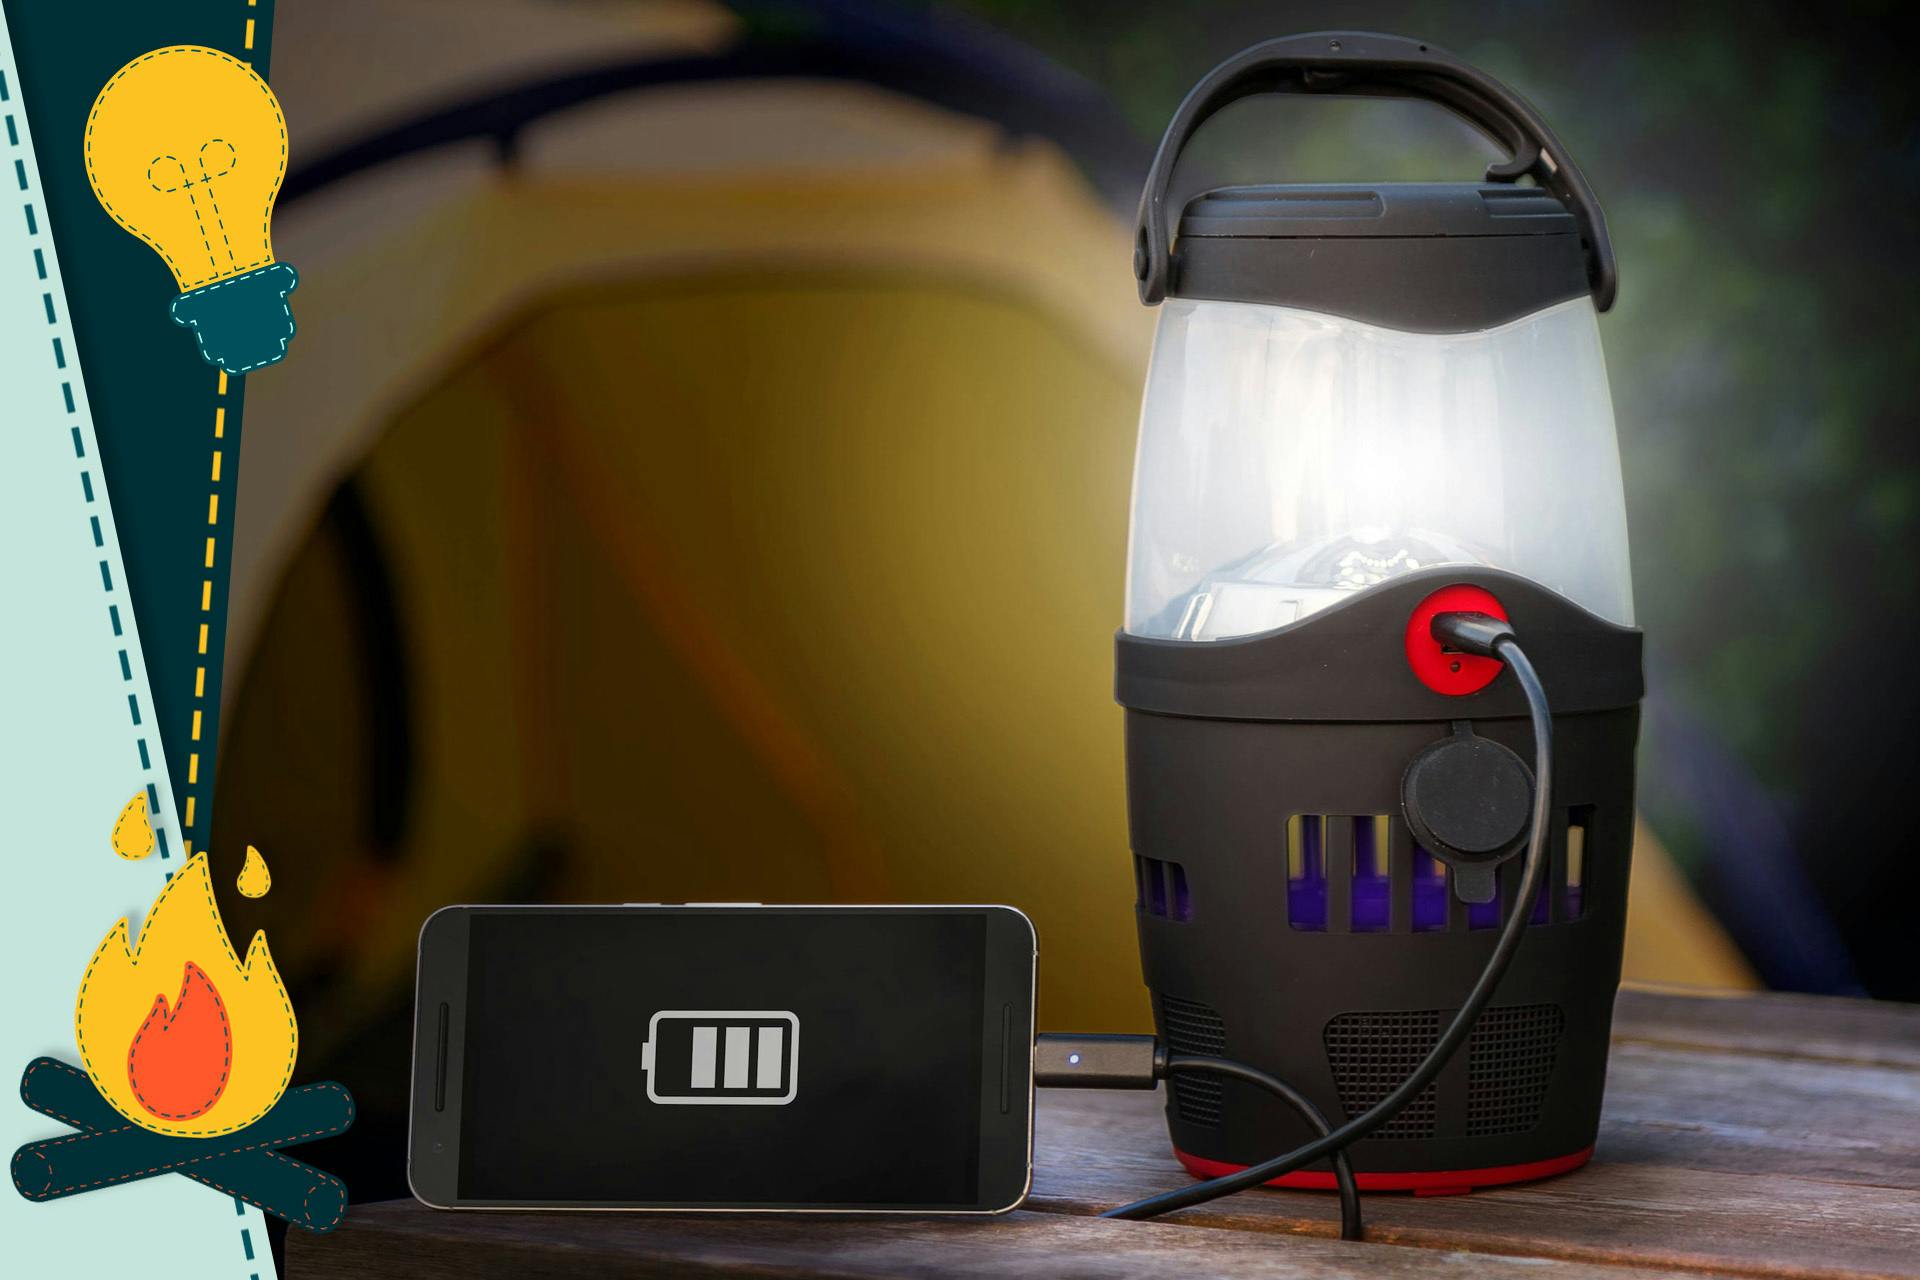 Camping lamp and charger